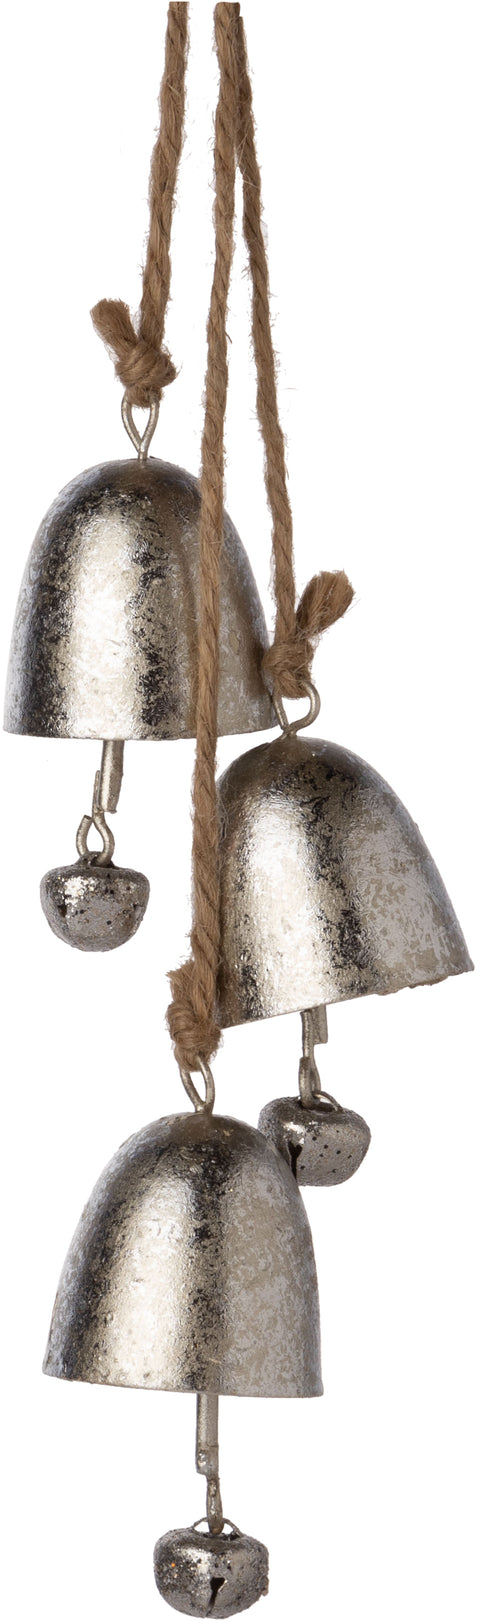 Antique Silver Bell Cluster – The Shop by Design Shop